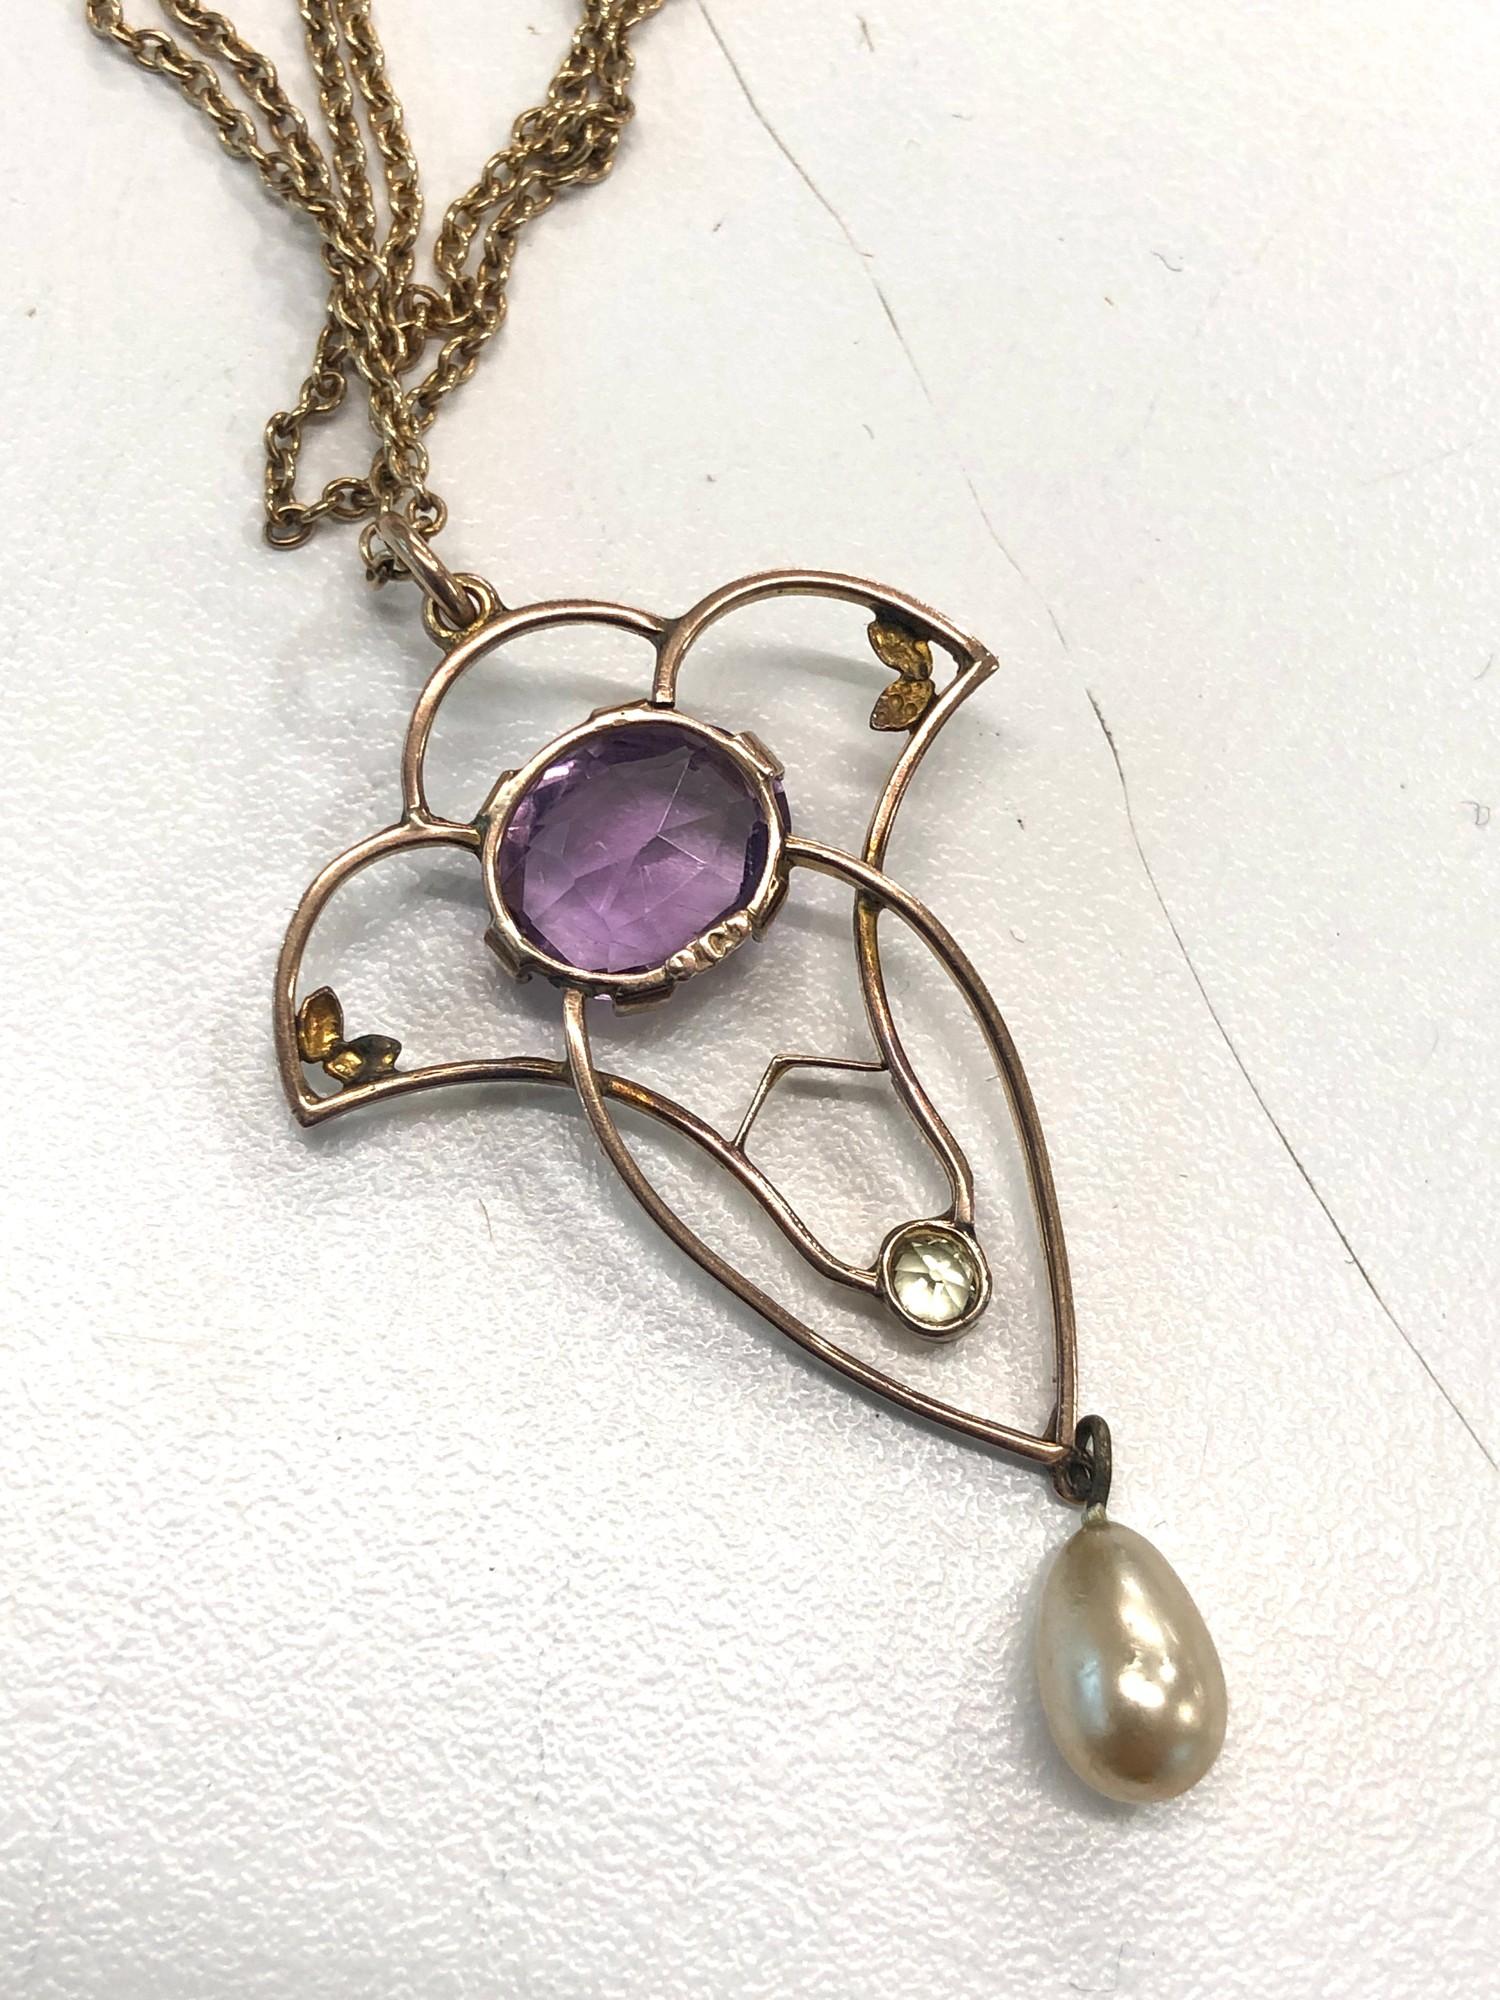 Antique 9ct gold amethyst and pearl drop pendant and chain pendant measures approx 4.6cm drop by 2. - Image 3 of 3